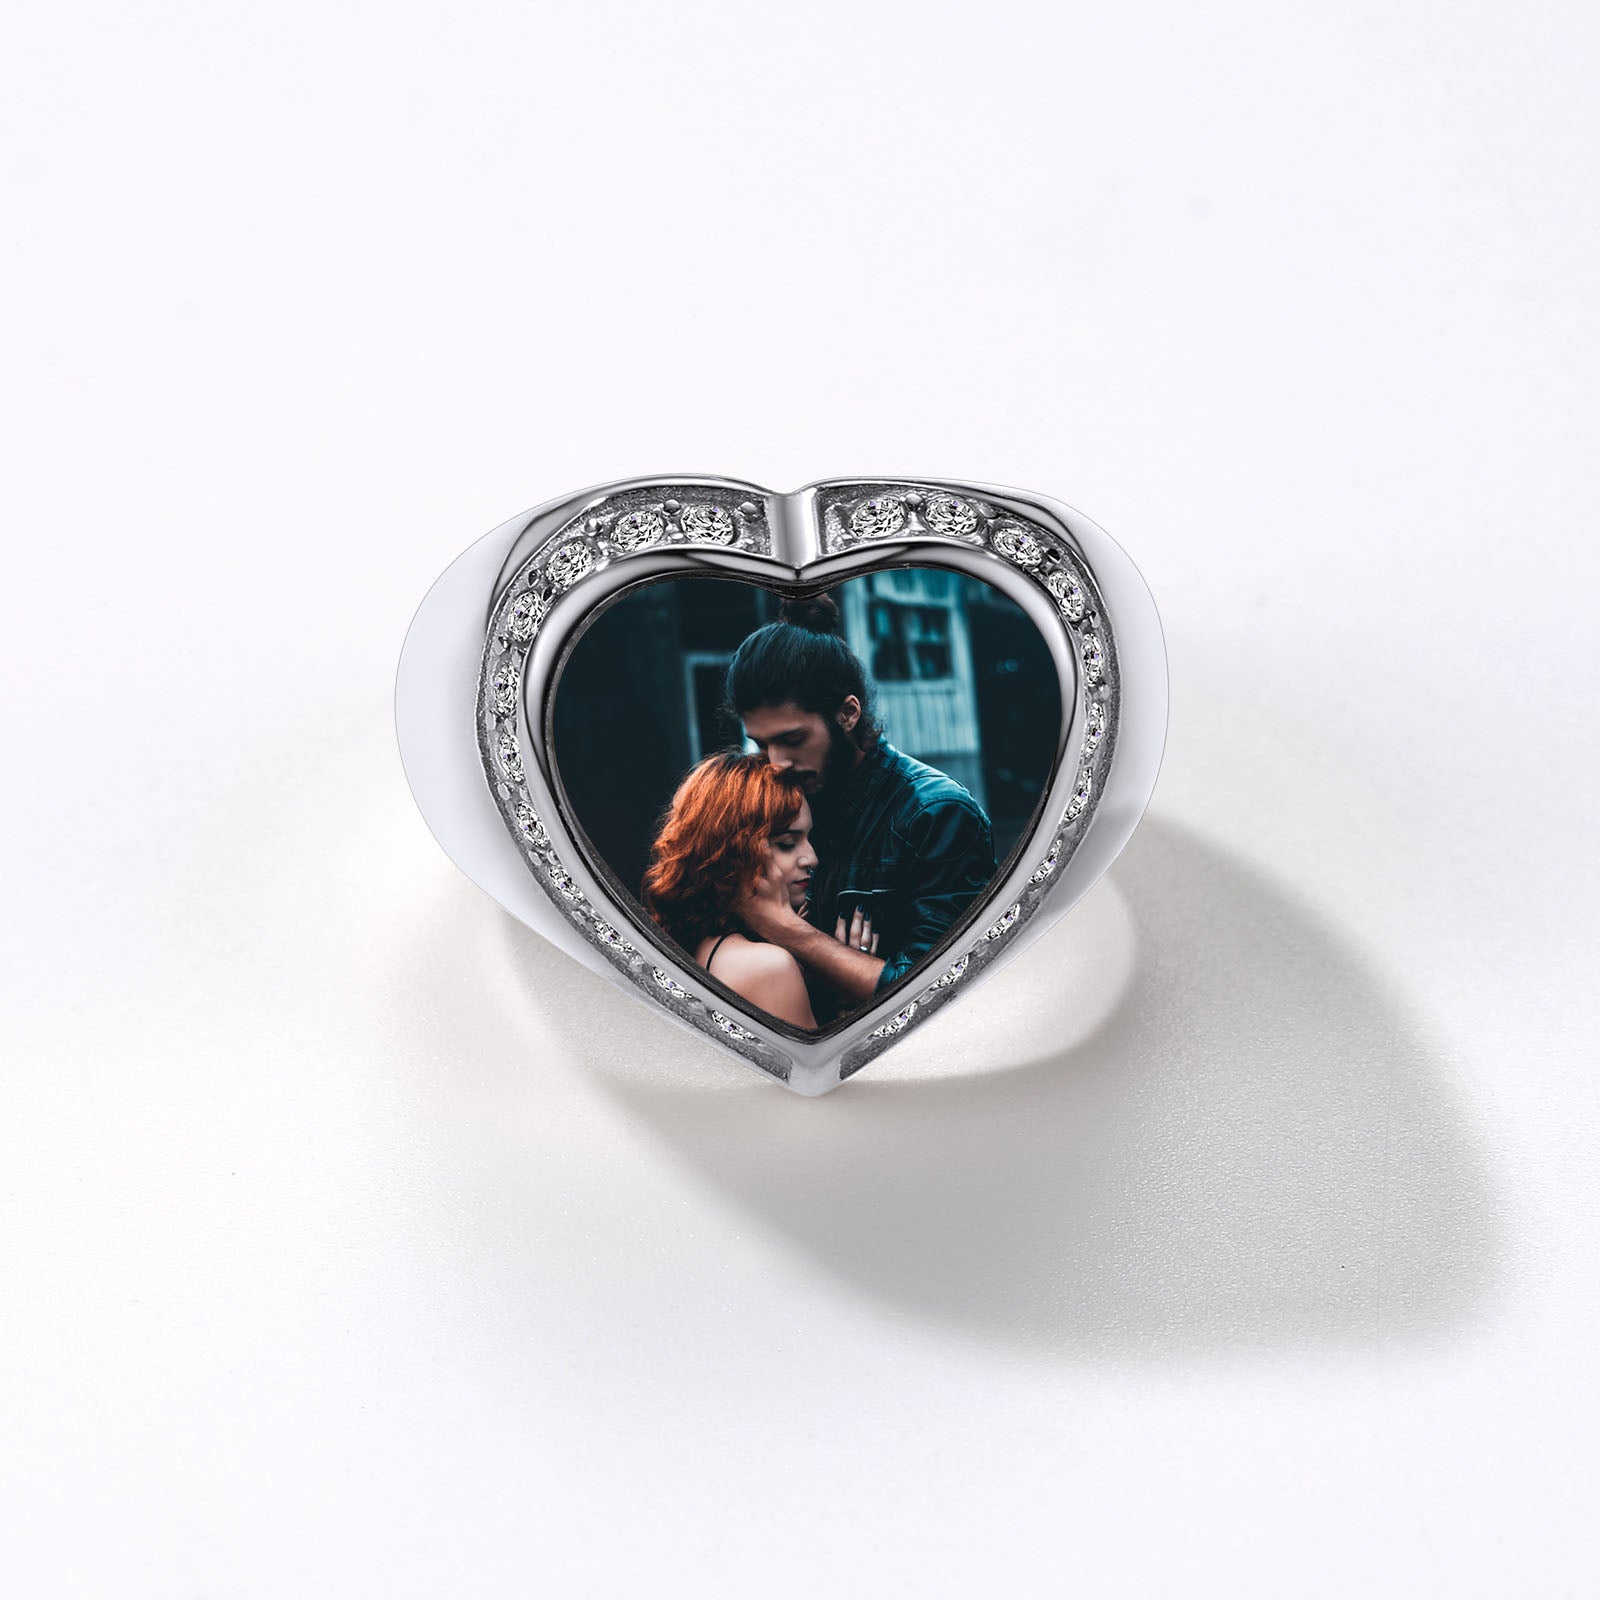 FaithHeart Heart Personalized Pictures Name Engraving Stainless Steel Signet Ring FaithHeart